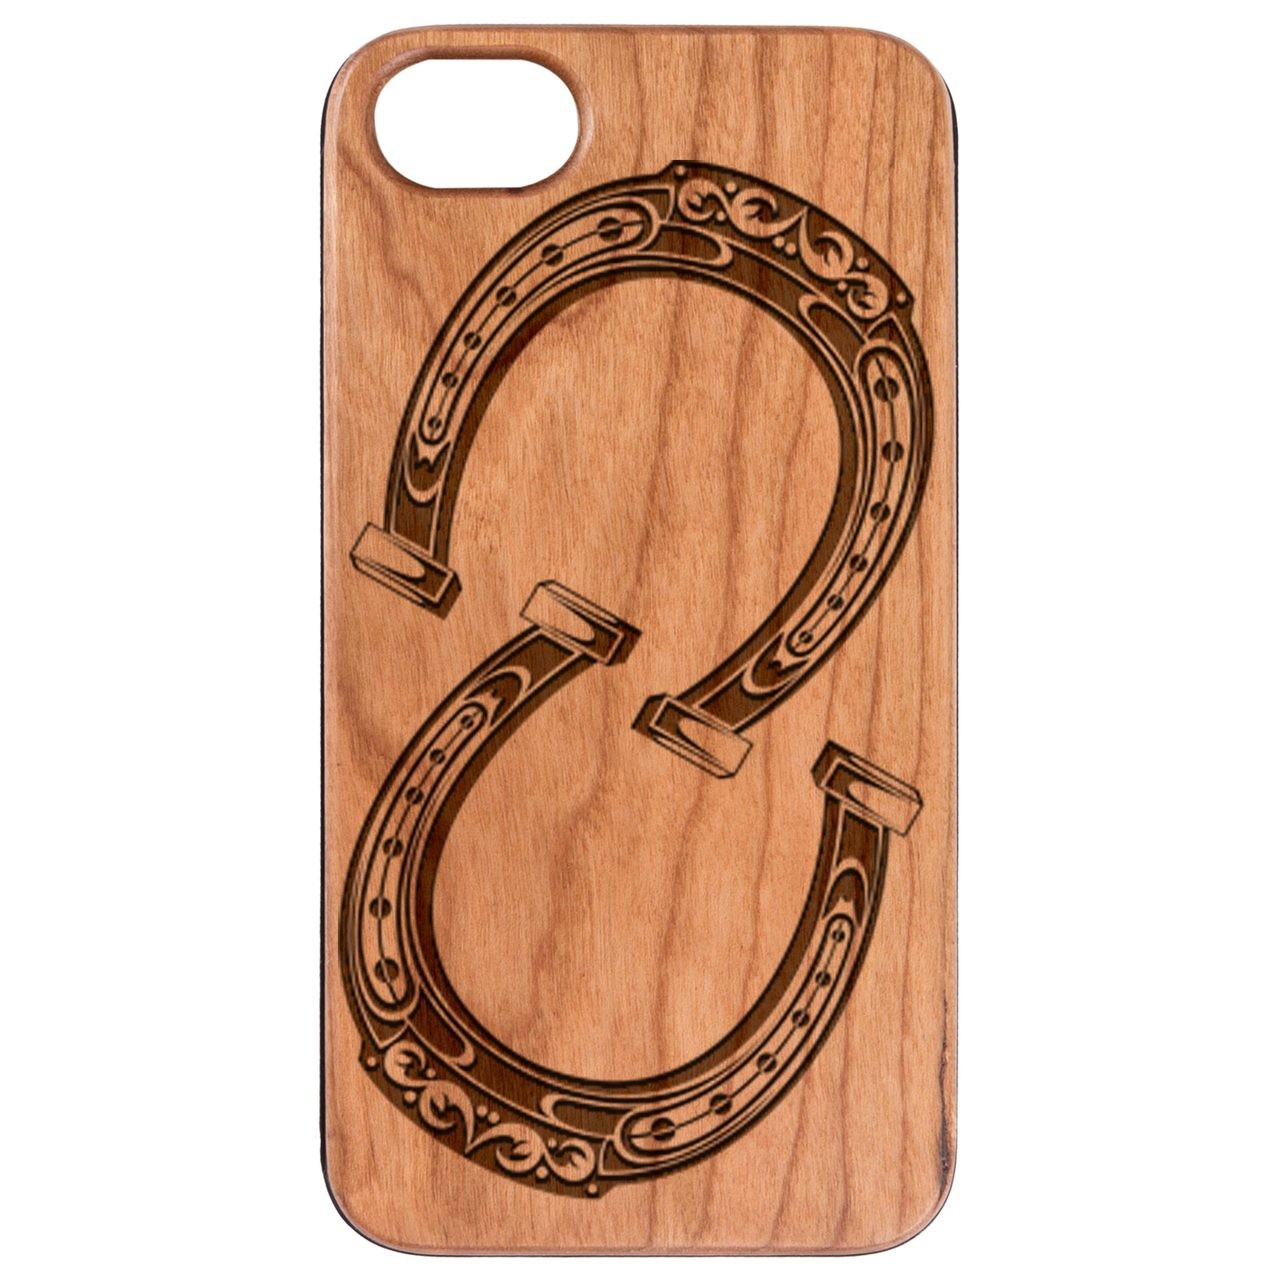  Horse Shoes - Engraved - Wooden Phone Case - IPhone 13 Models